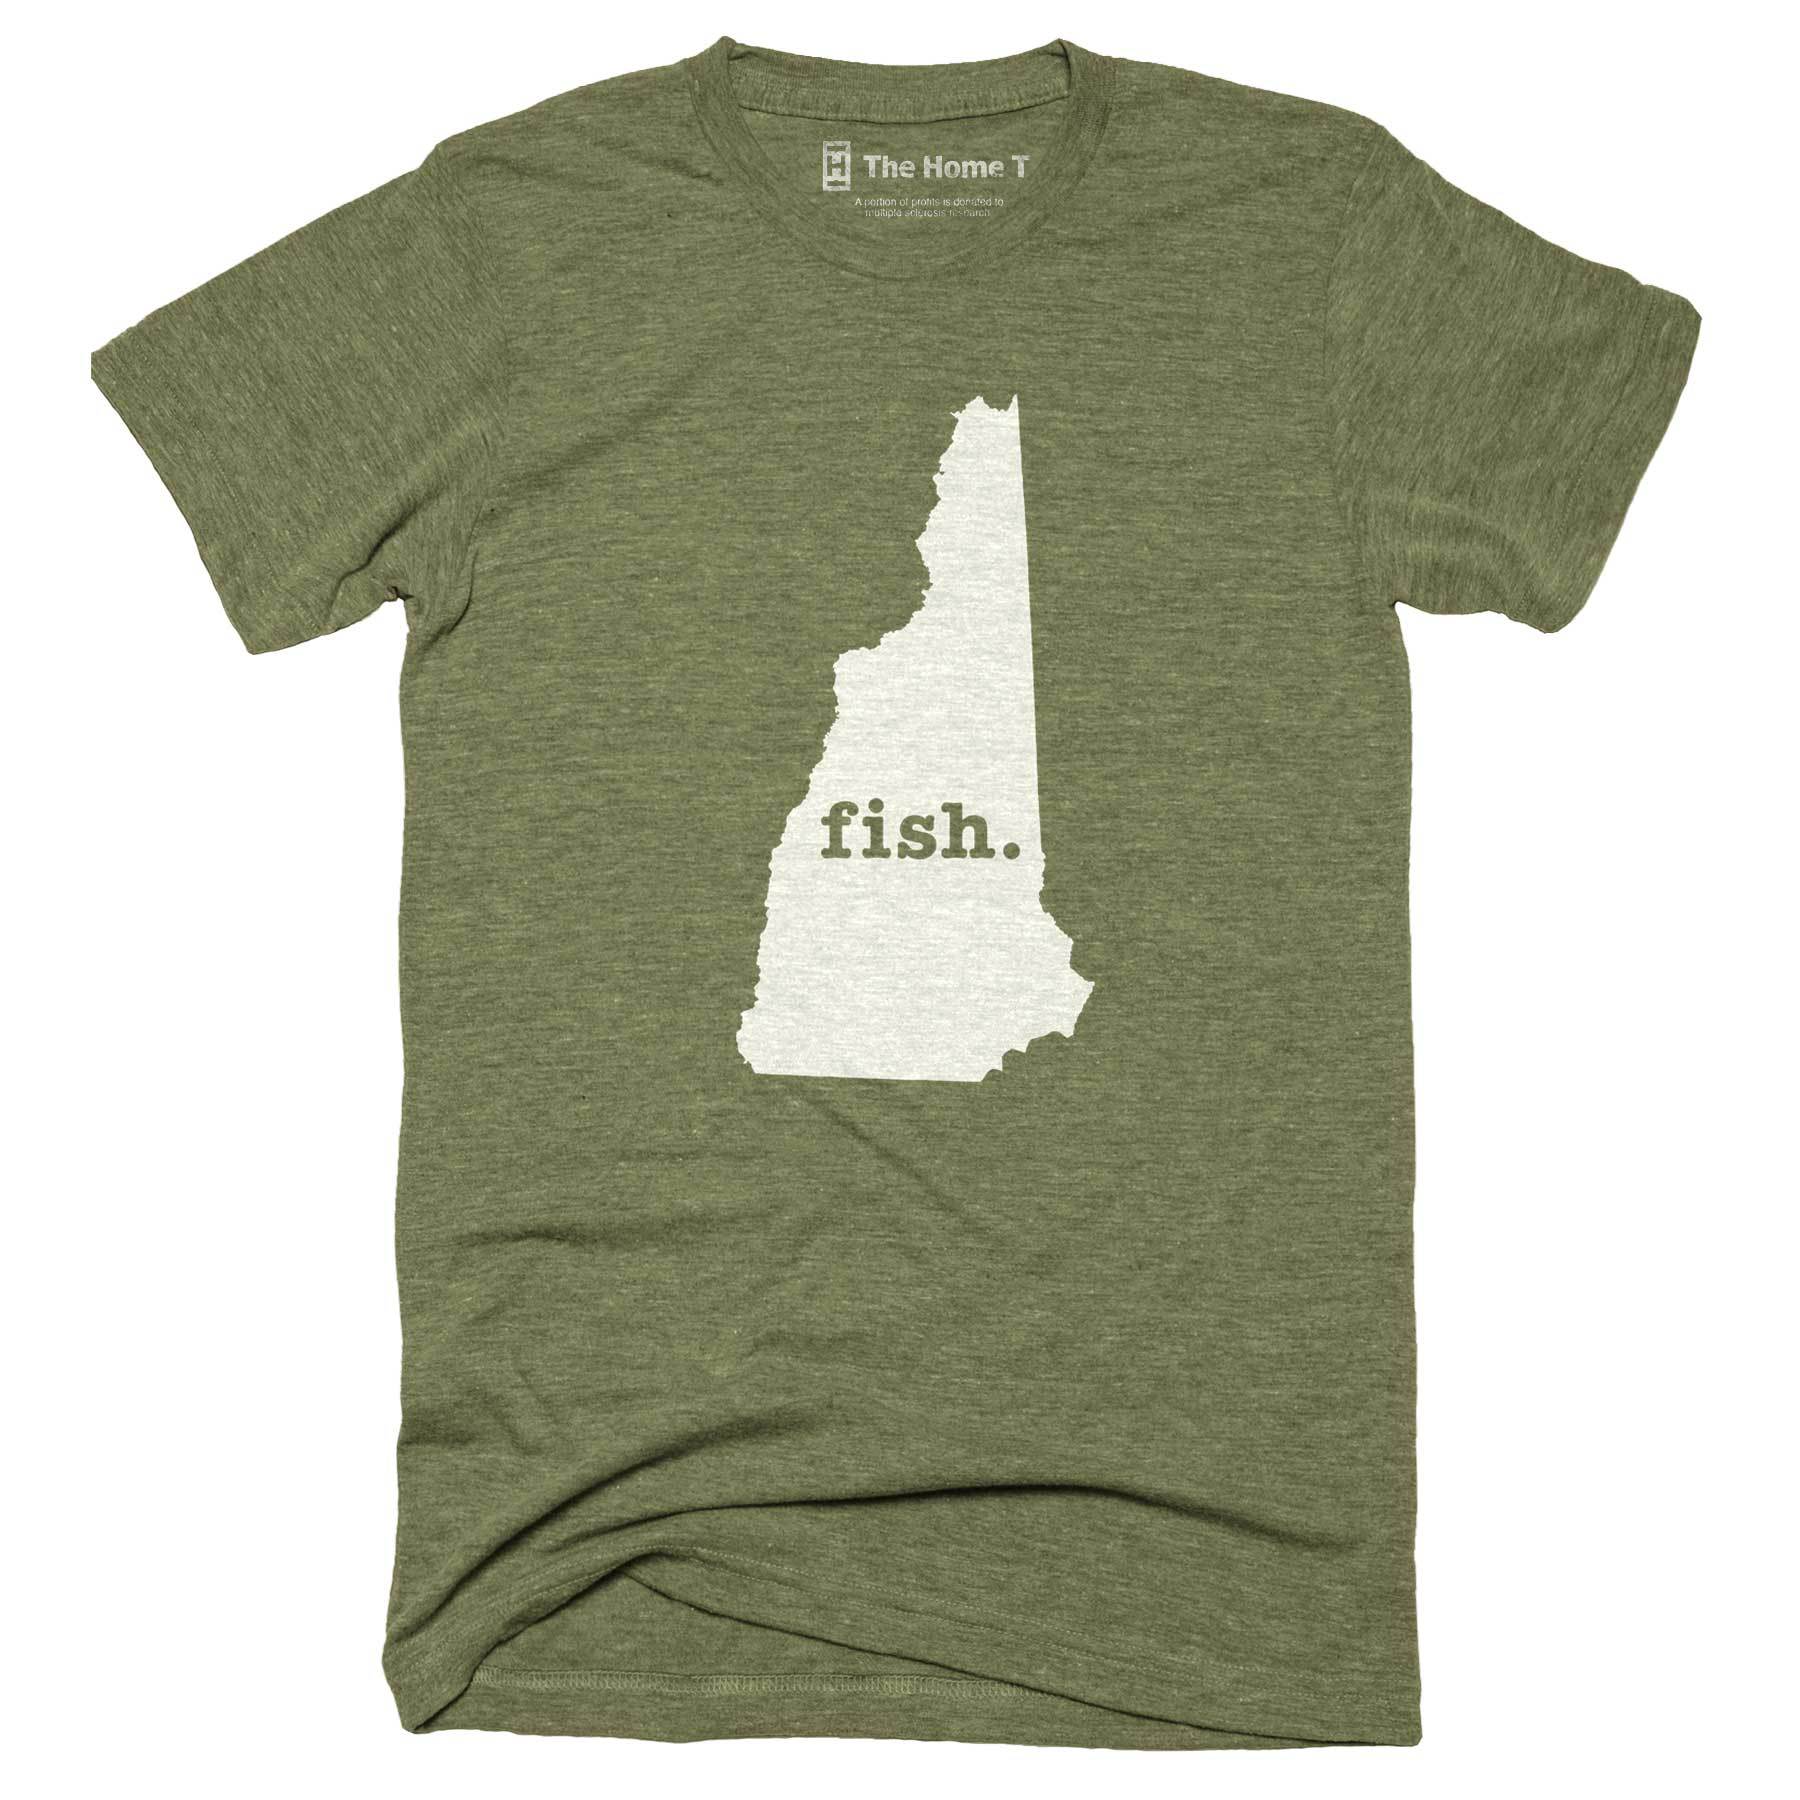 New Hampshire Fish Home T-Shirt Outdoor Collection The Home T